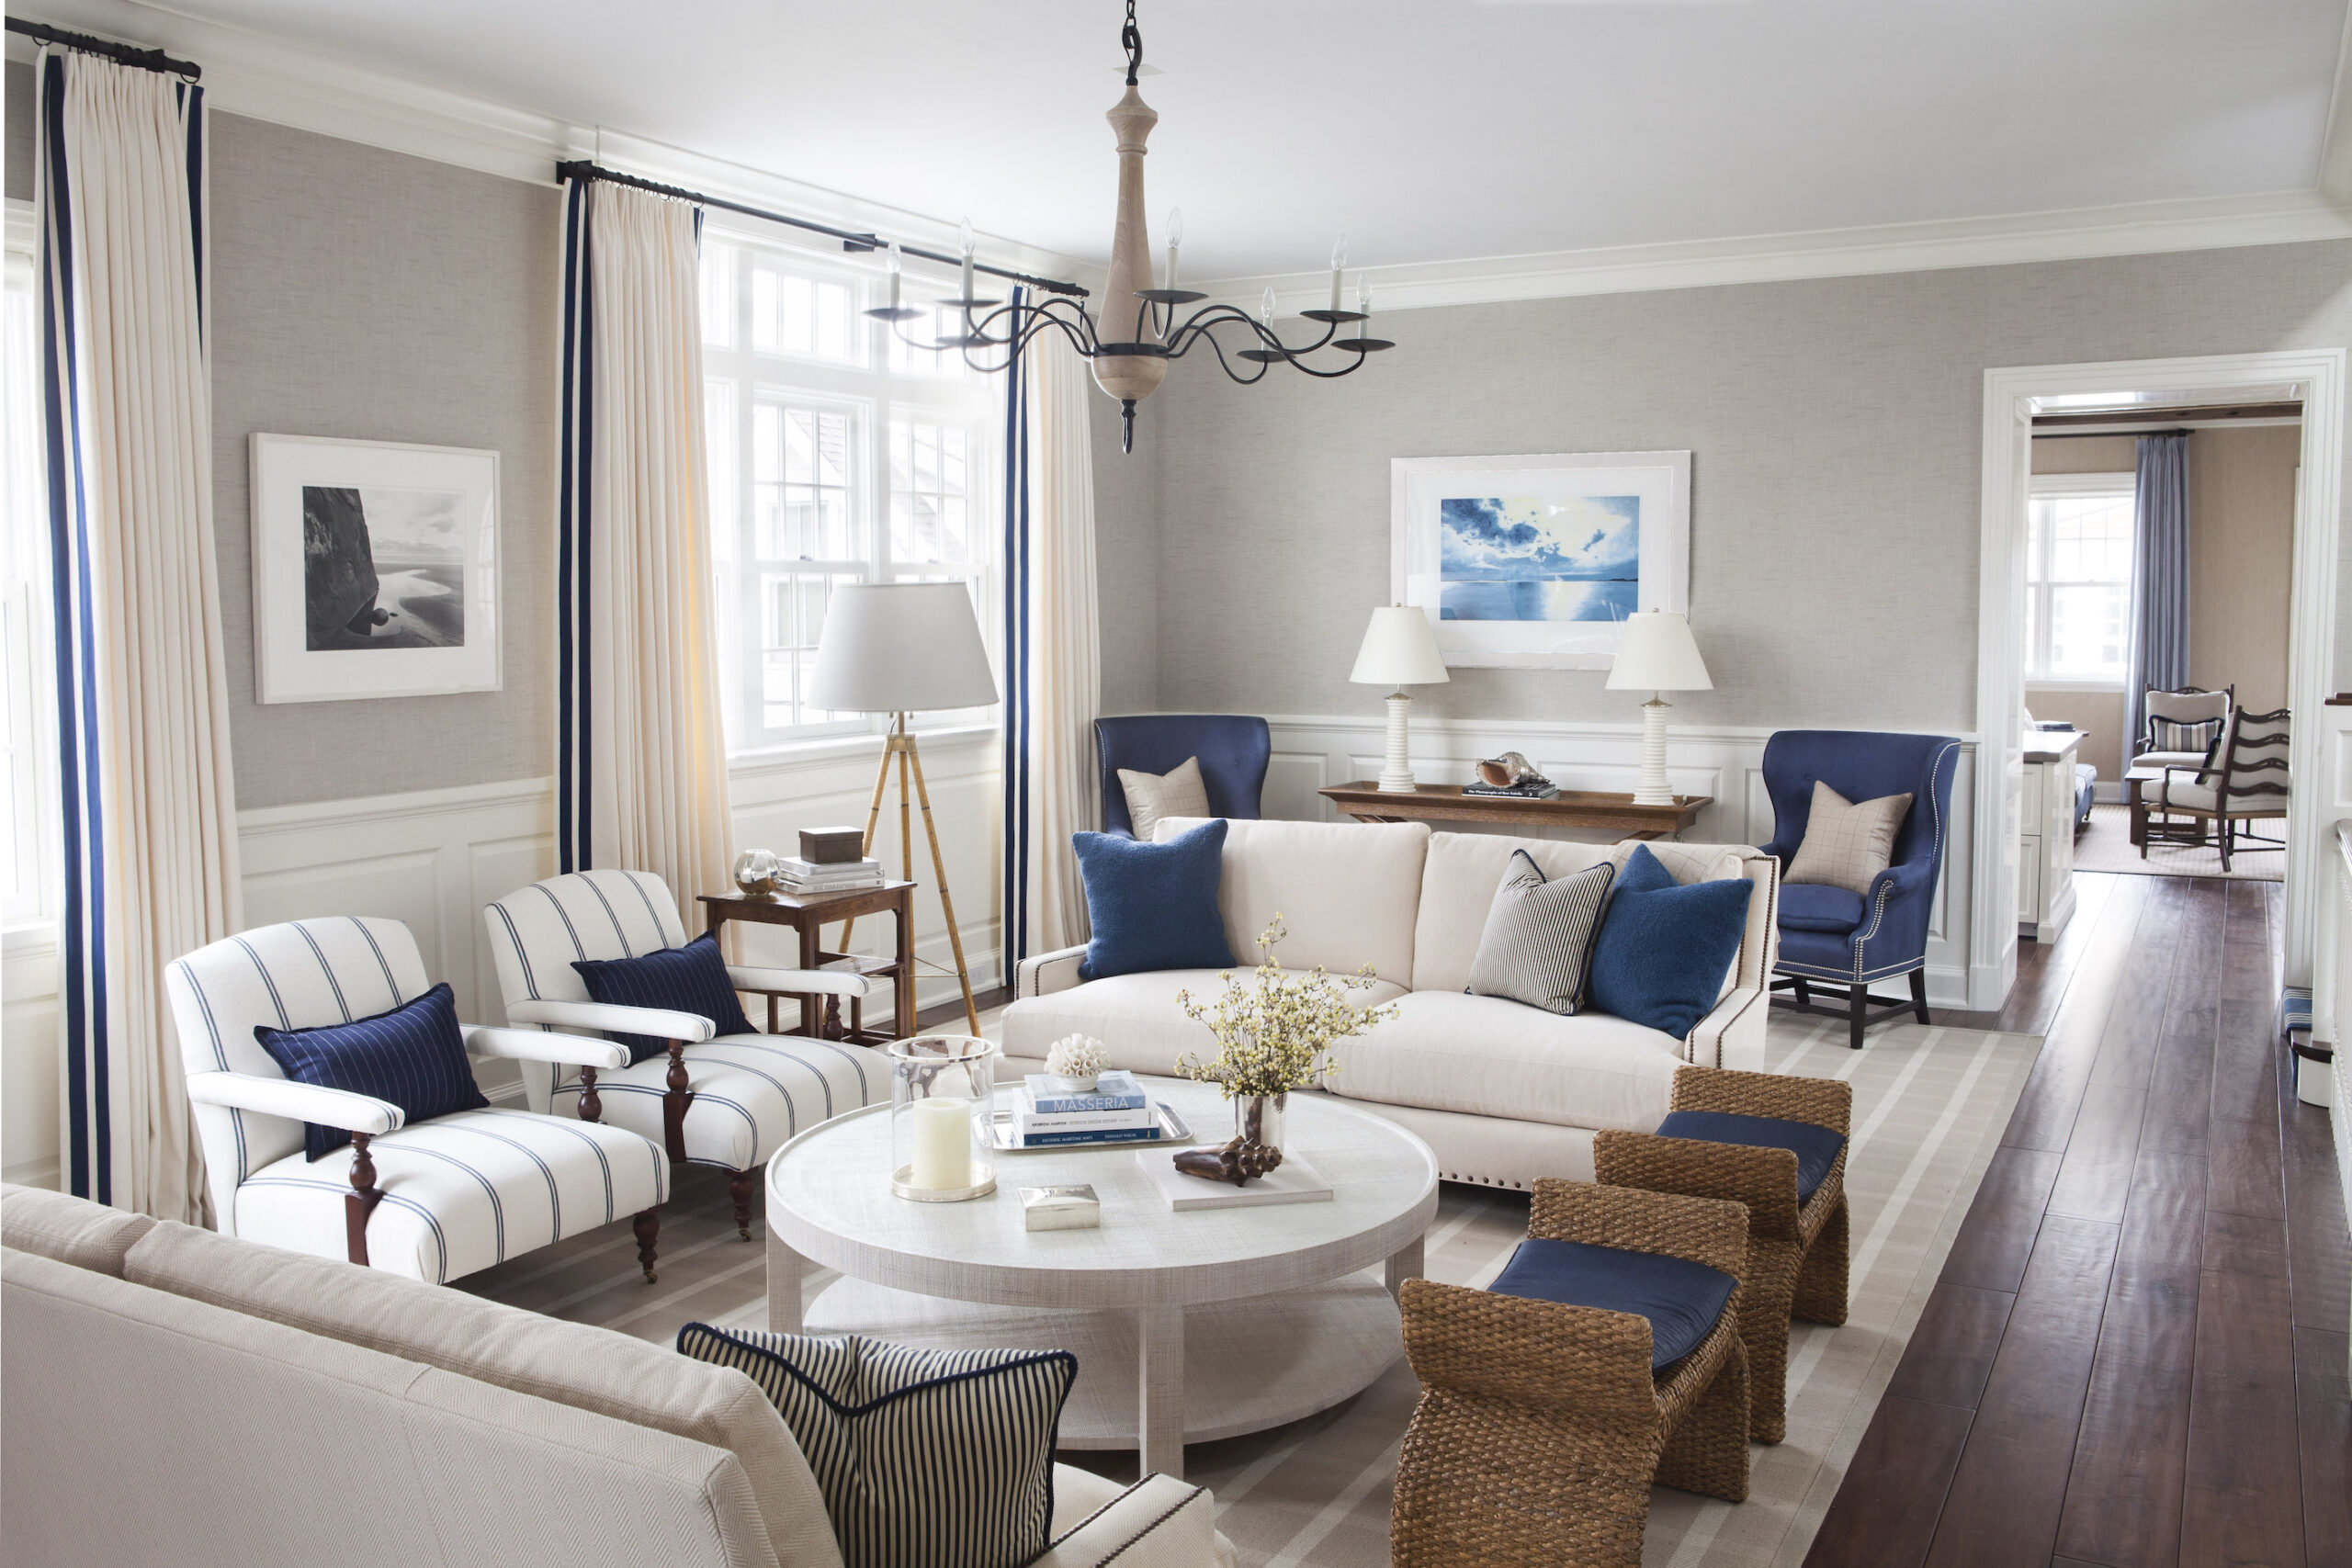 Inspiring harmony of blue and beige in interior design